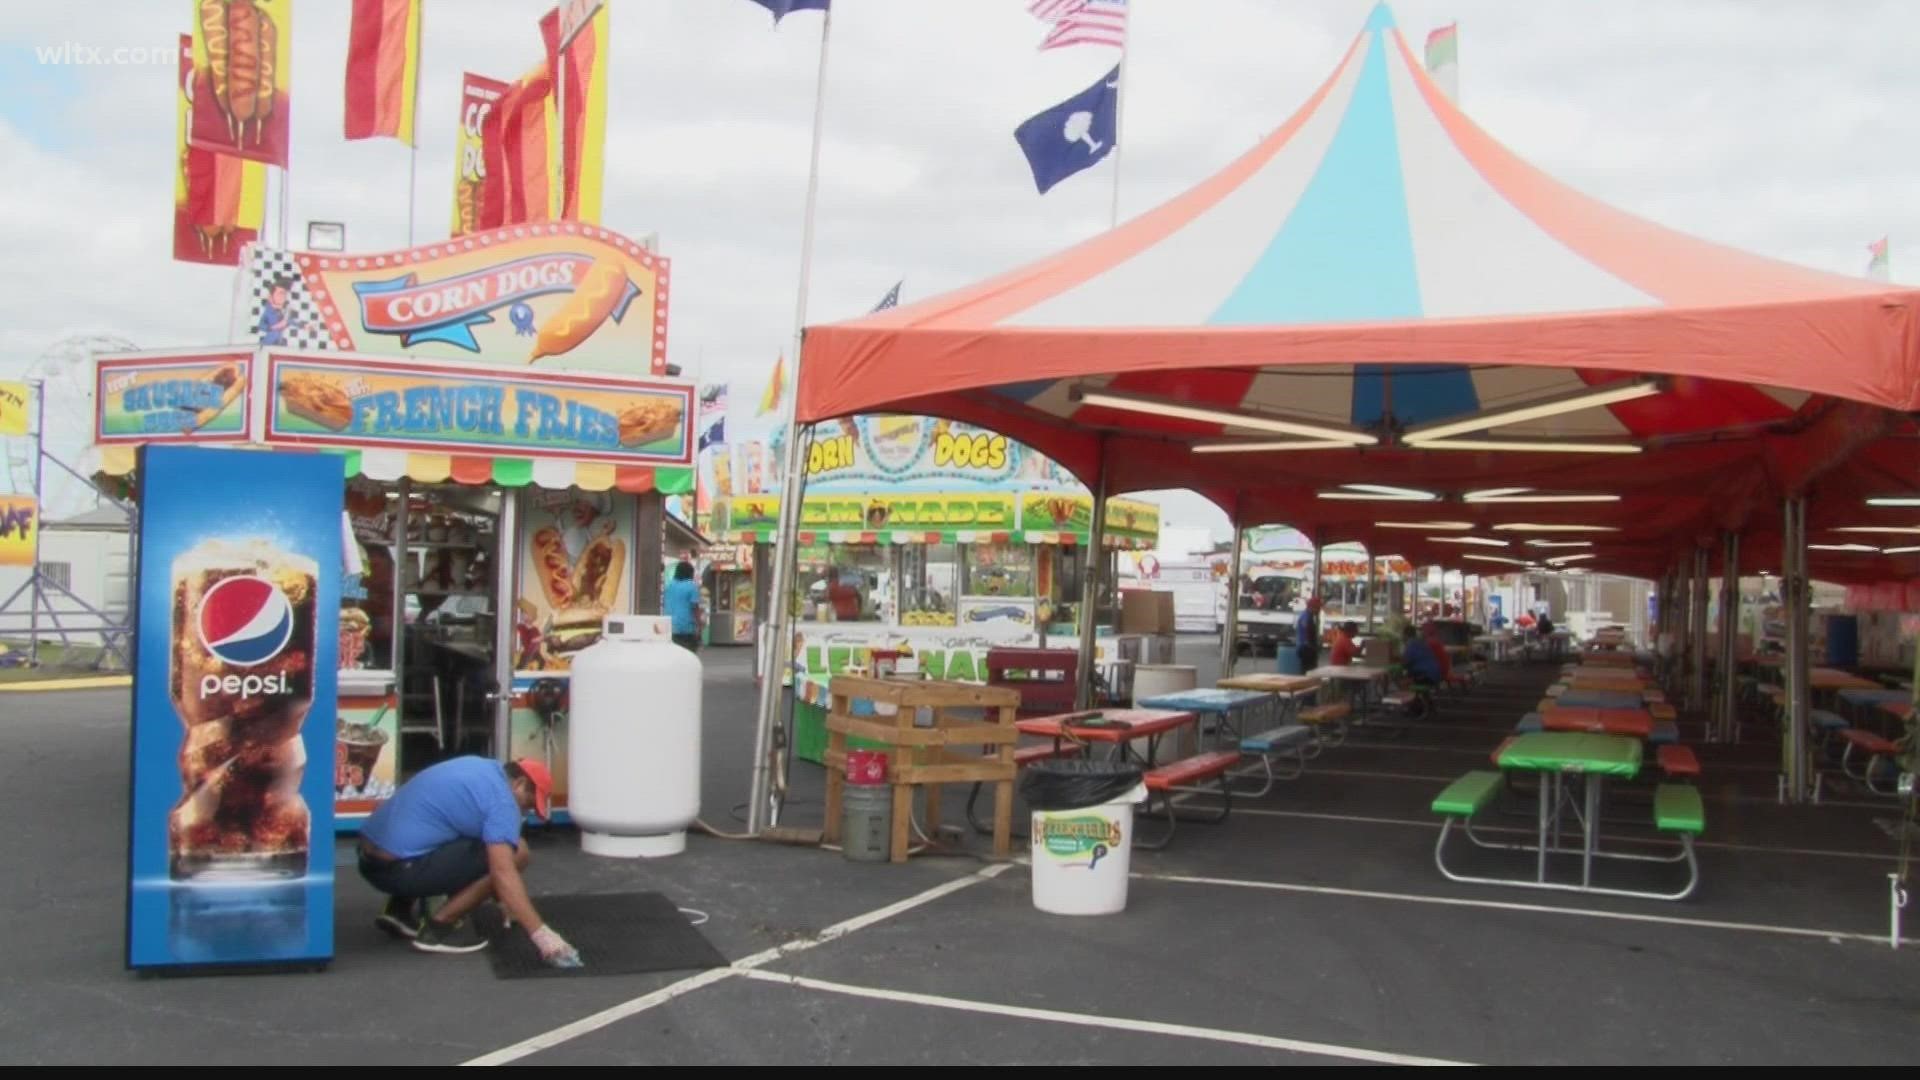 The South Carolina State Fair is kicking off their 152nd annual event  and is taking extra precautions to minimize the risk of COVID-19.